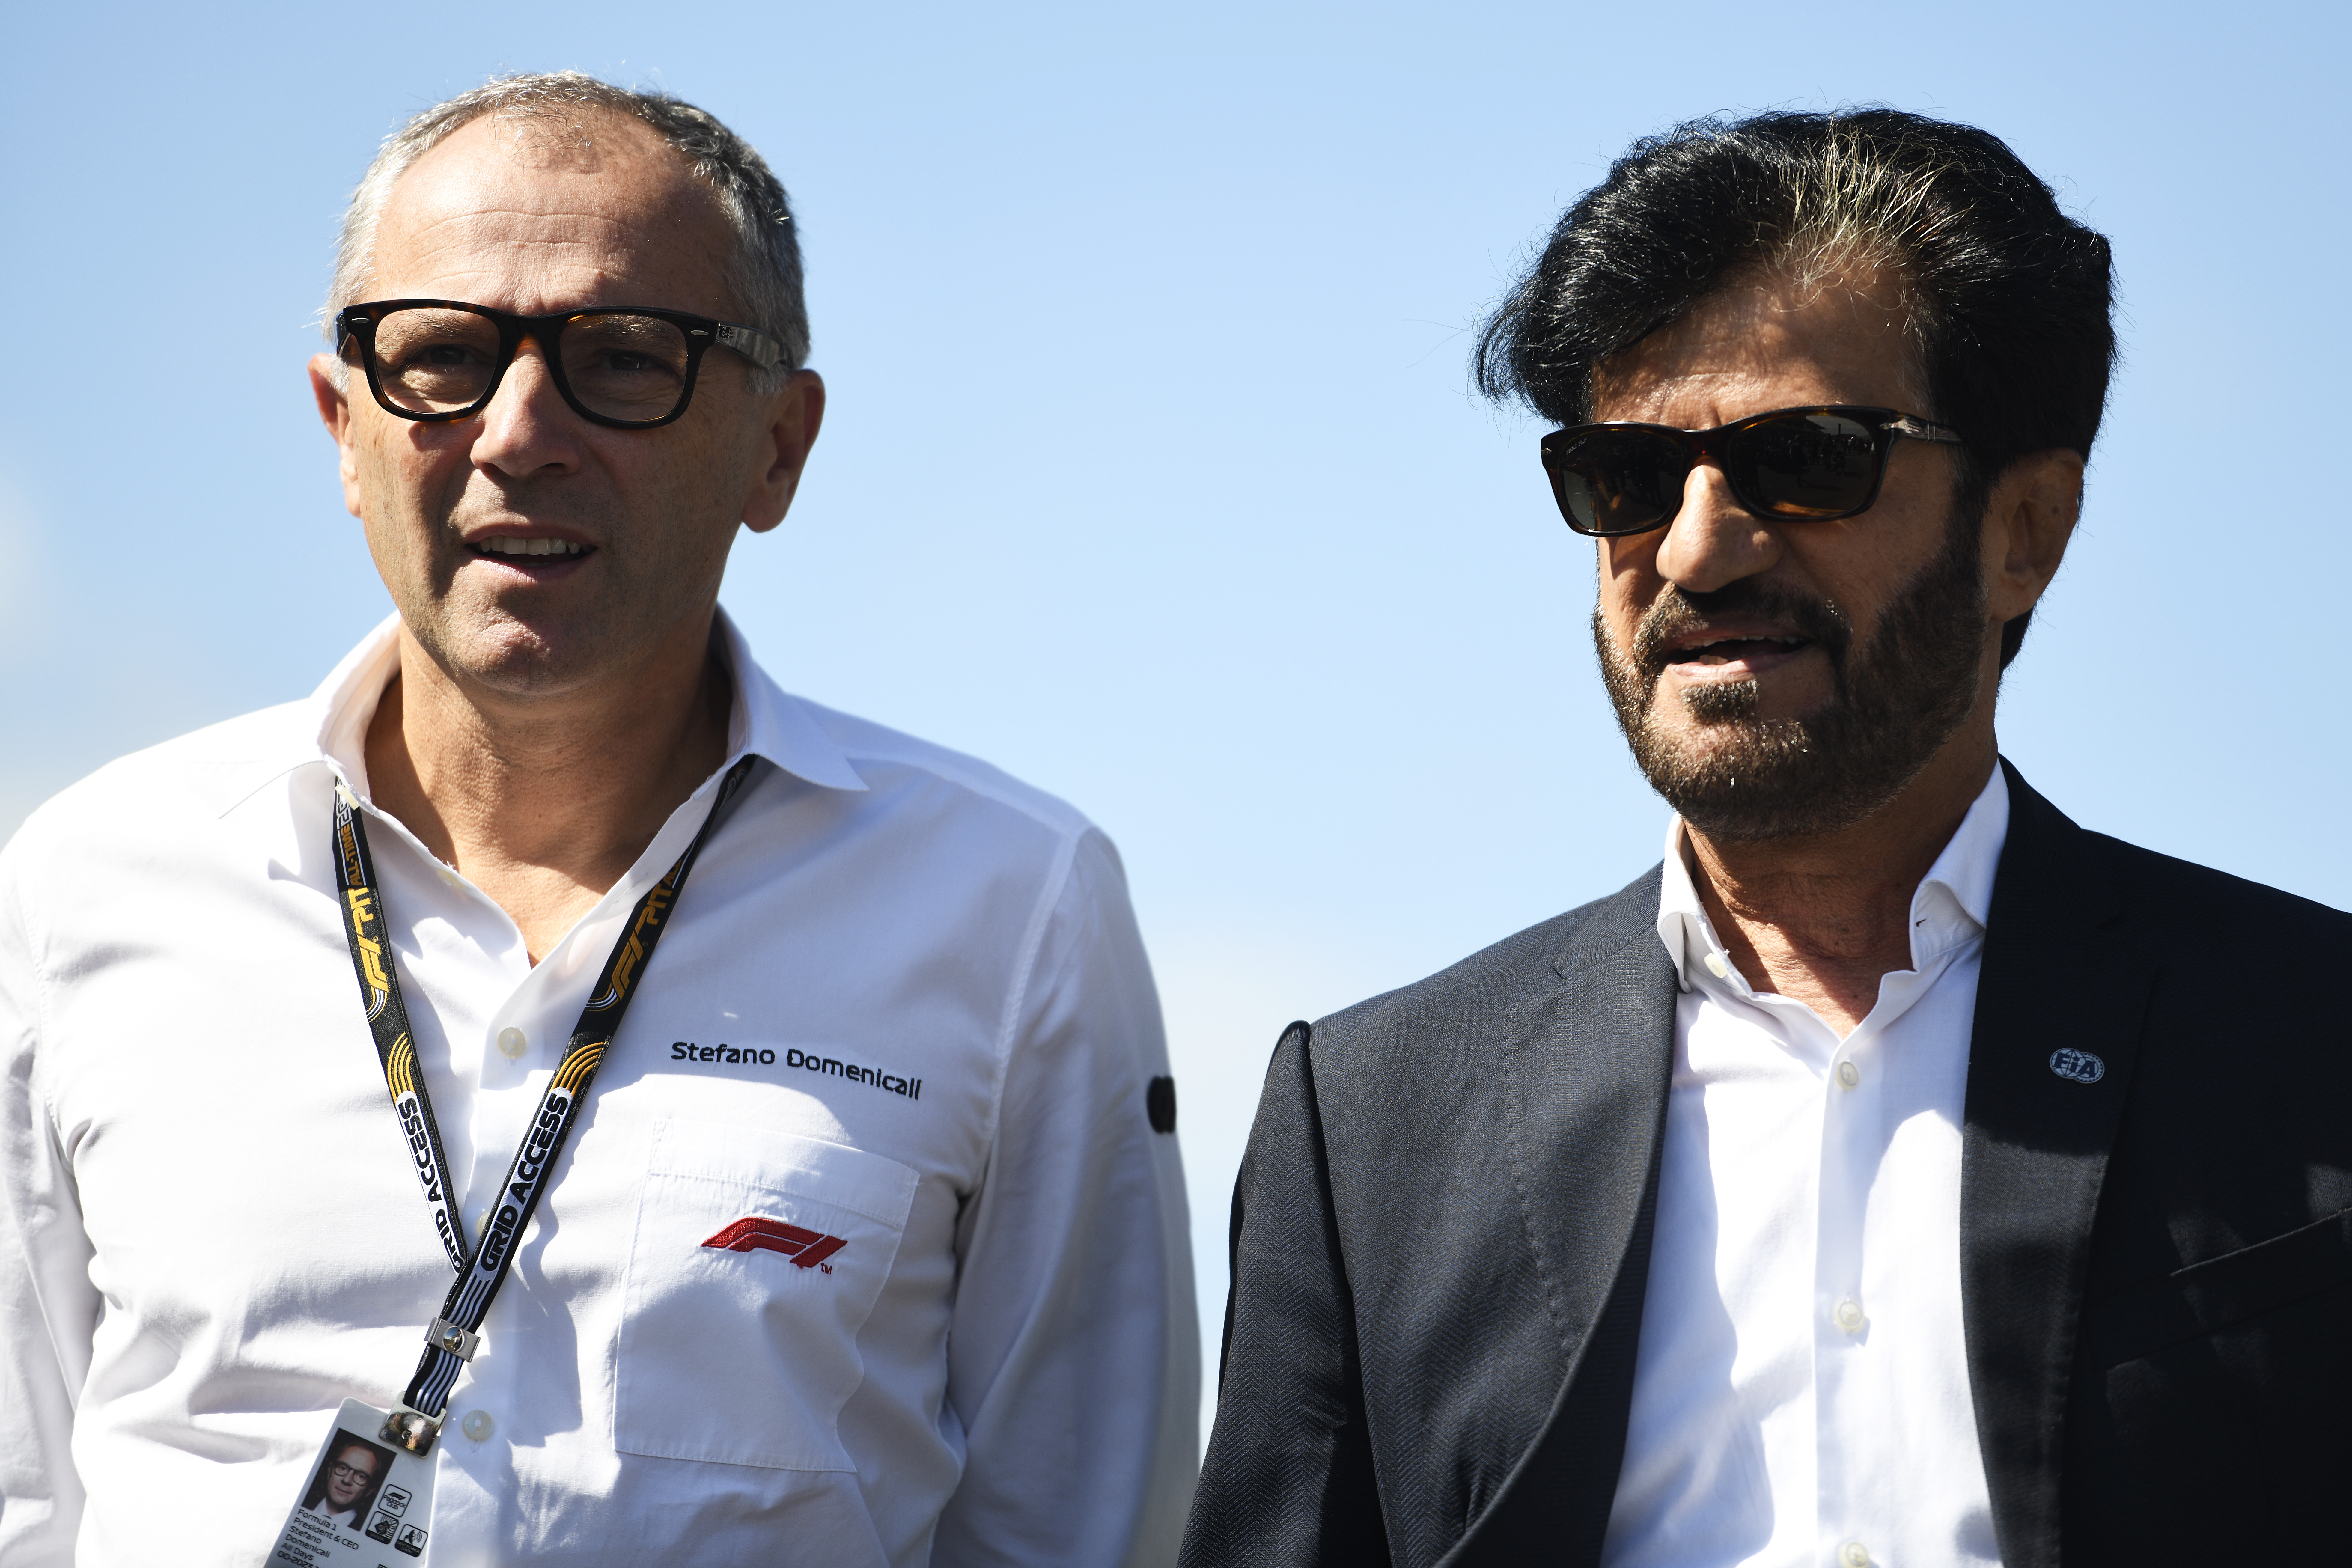 SUZUKA, JAPAN - SEPTEMBER 24: Stefano Domenicali, CEO of the Formula One Group, and Mohammed ben Sulayem, FIA President, talk on the grid during the F1 Grand Prix of Japan at Suzuka International Racing Course on September 24, 2023 in Suzuka, Japan. (Photo by Rudy Carezzevoli/Getty Images)